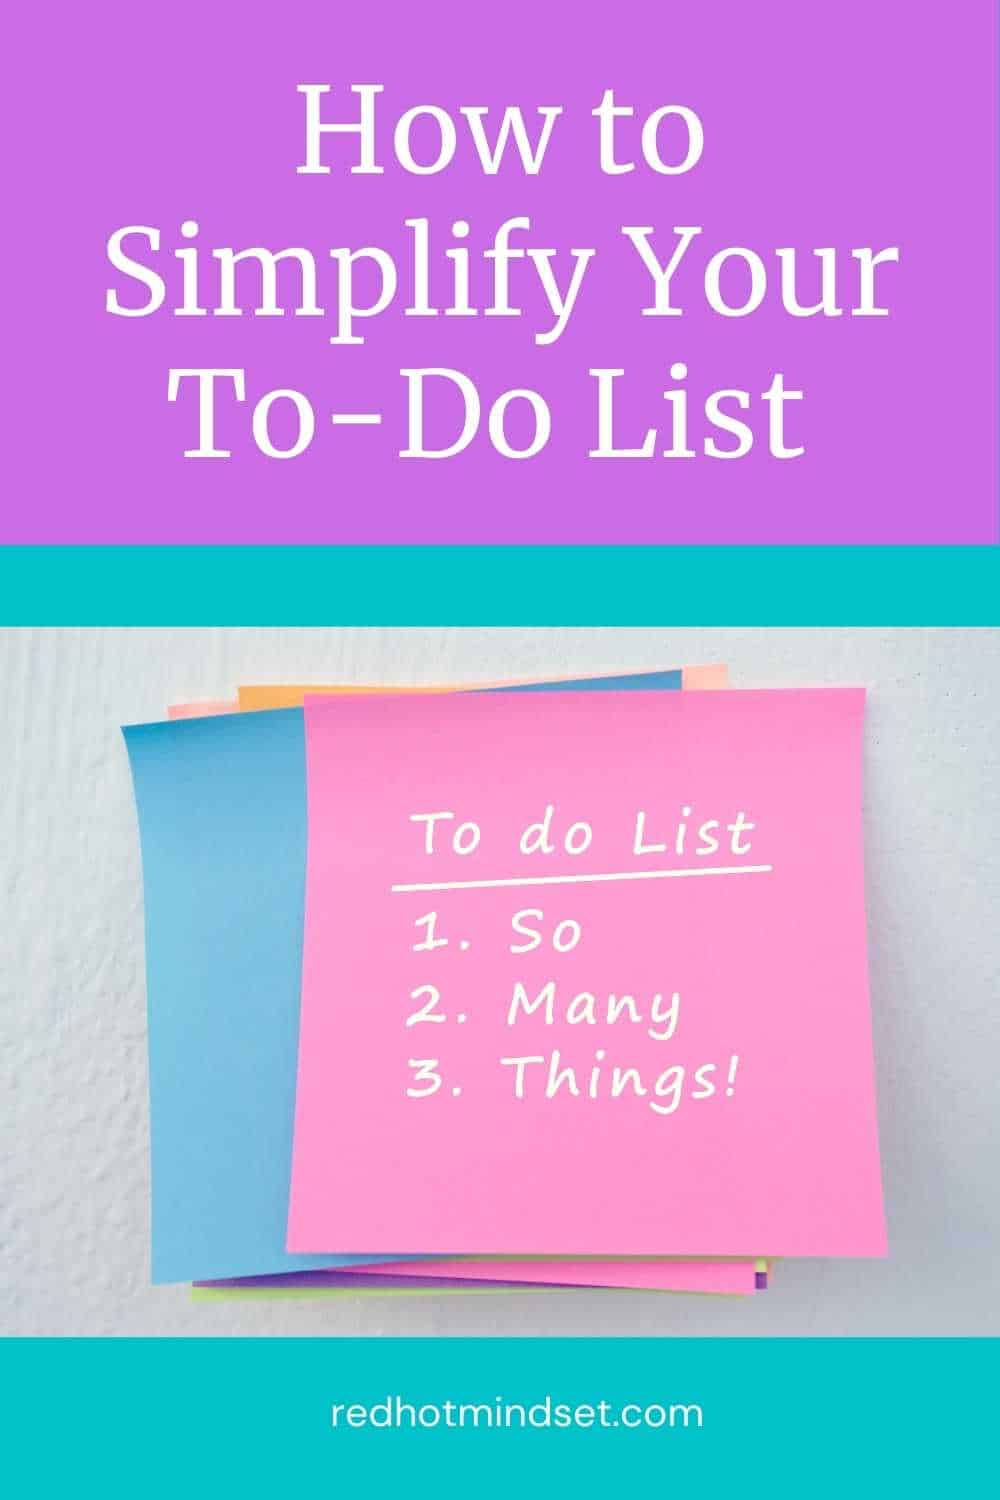 Ep 127 | 3 Easy Ways to Simplify Your To-Do List and Get More Done